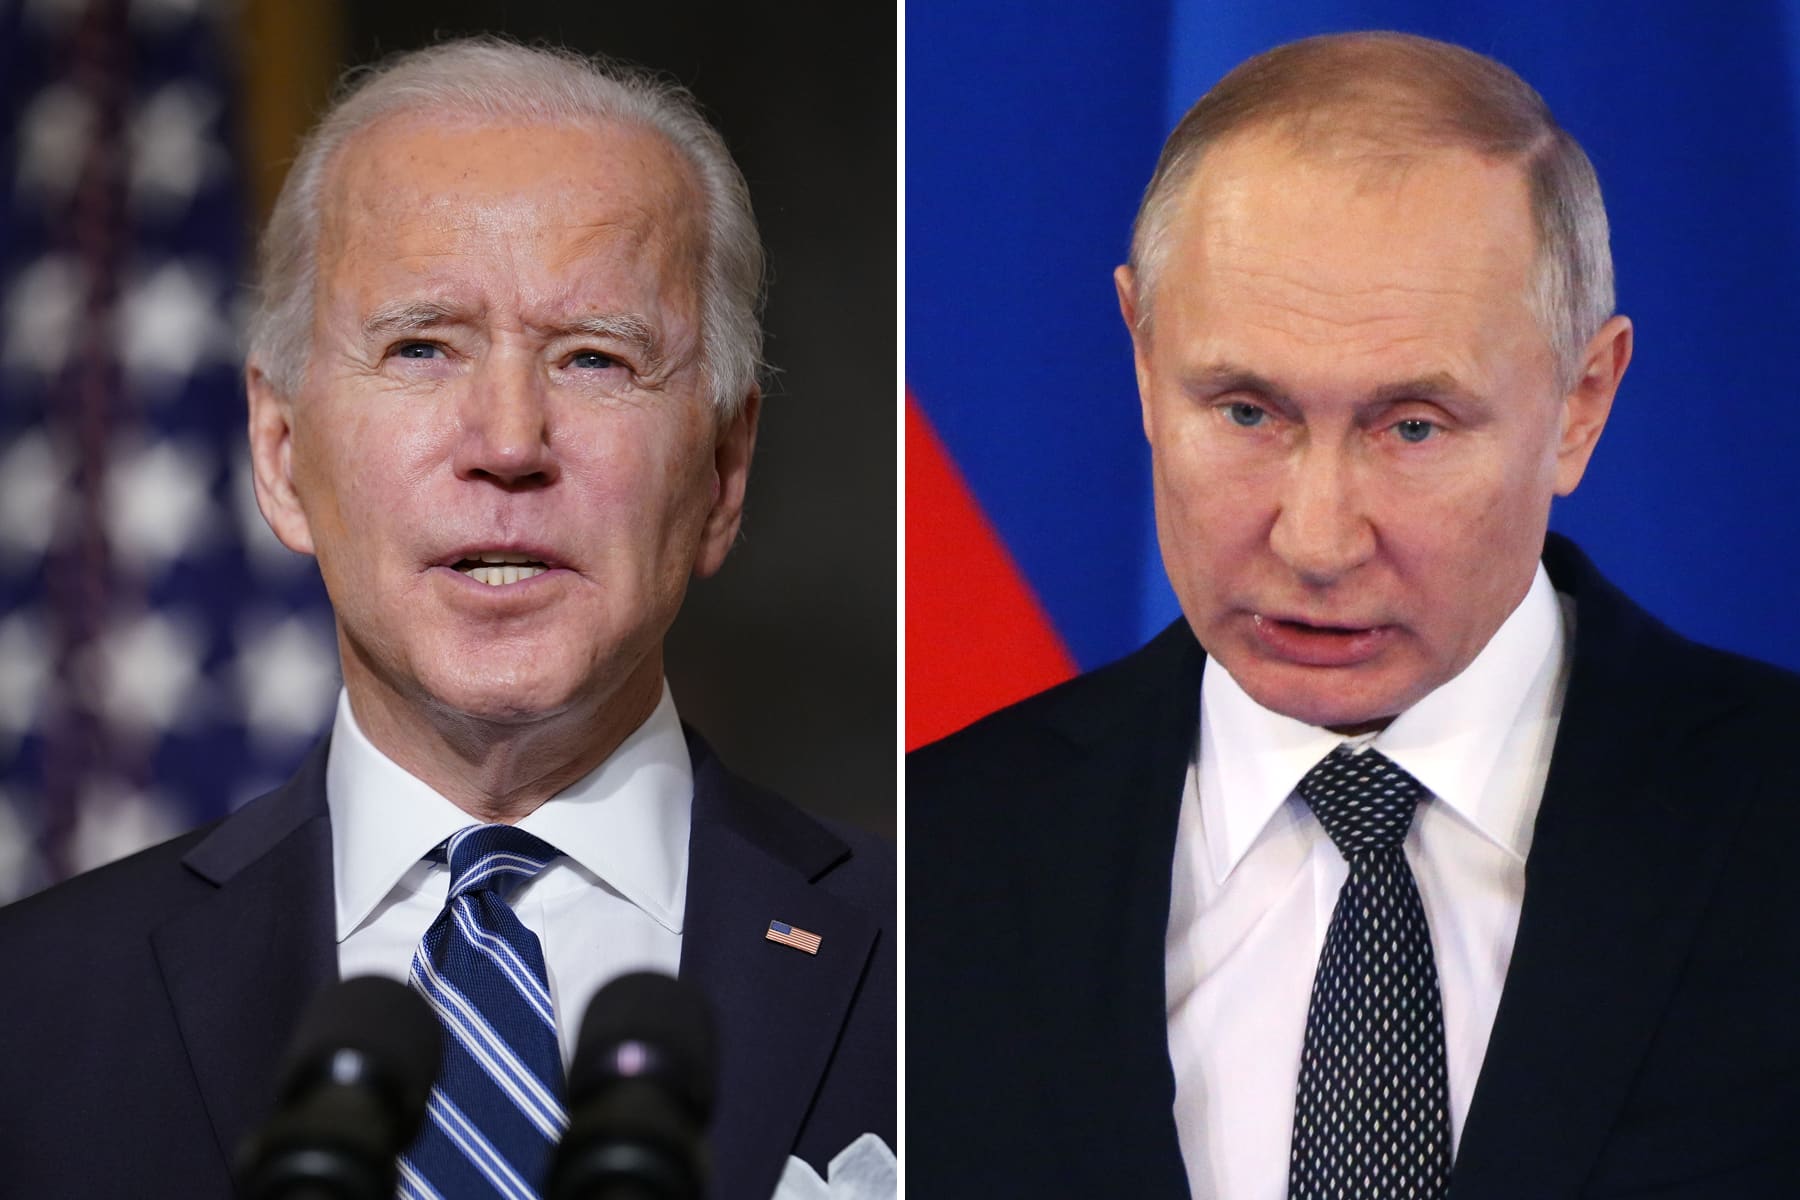 Biden administration sanctions Russia for cyberattacks, election interference